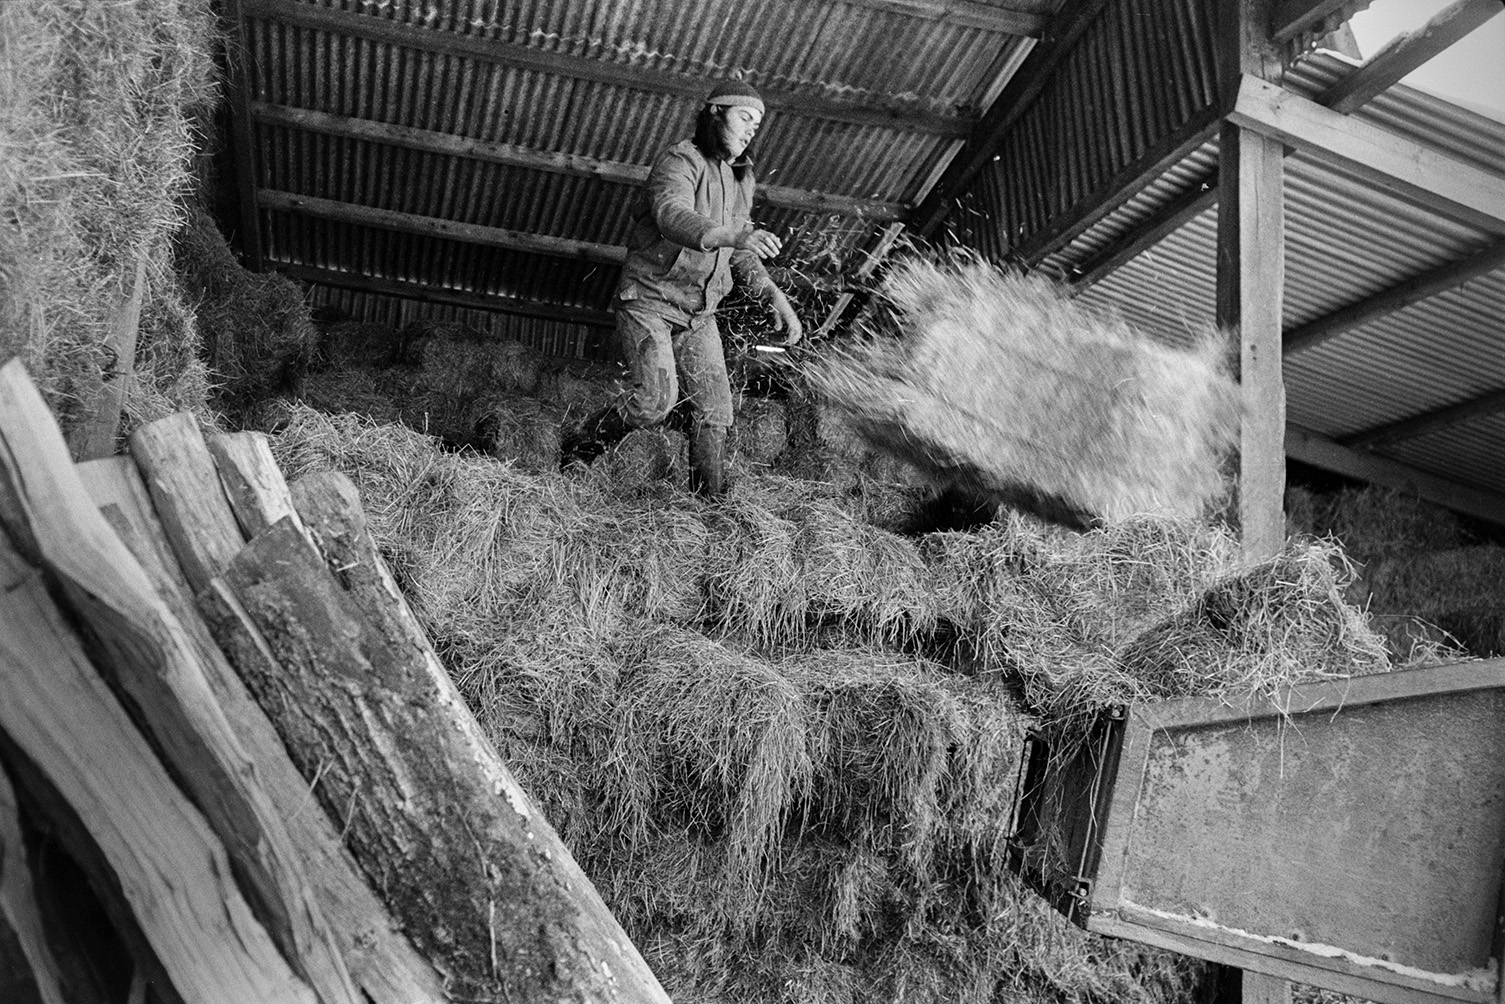 Derek Bright filling a link box with hay to feed to cattle, in a corrugated iron barn at Mill Road Farm, Beaford. He is throwing a hay bale into the link box. A stack of logs can be seen in the foreground. The farm was also known as Jeffrys.